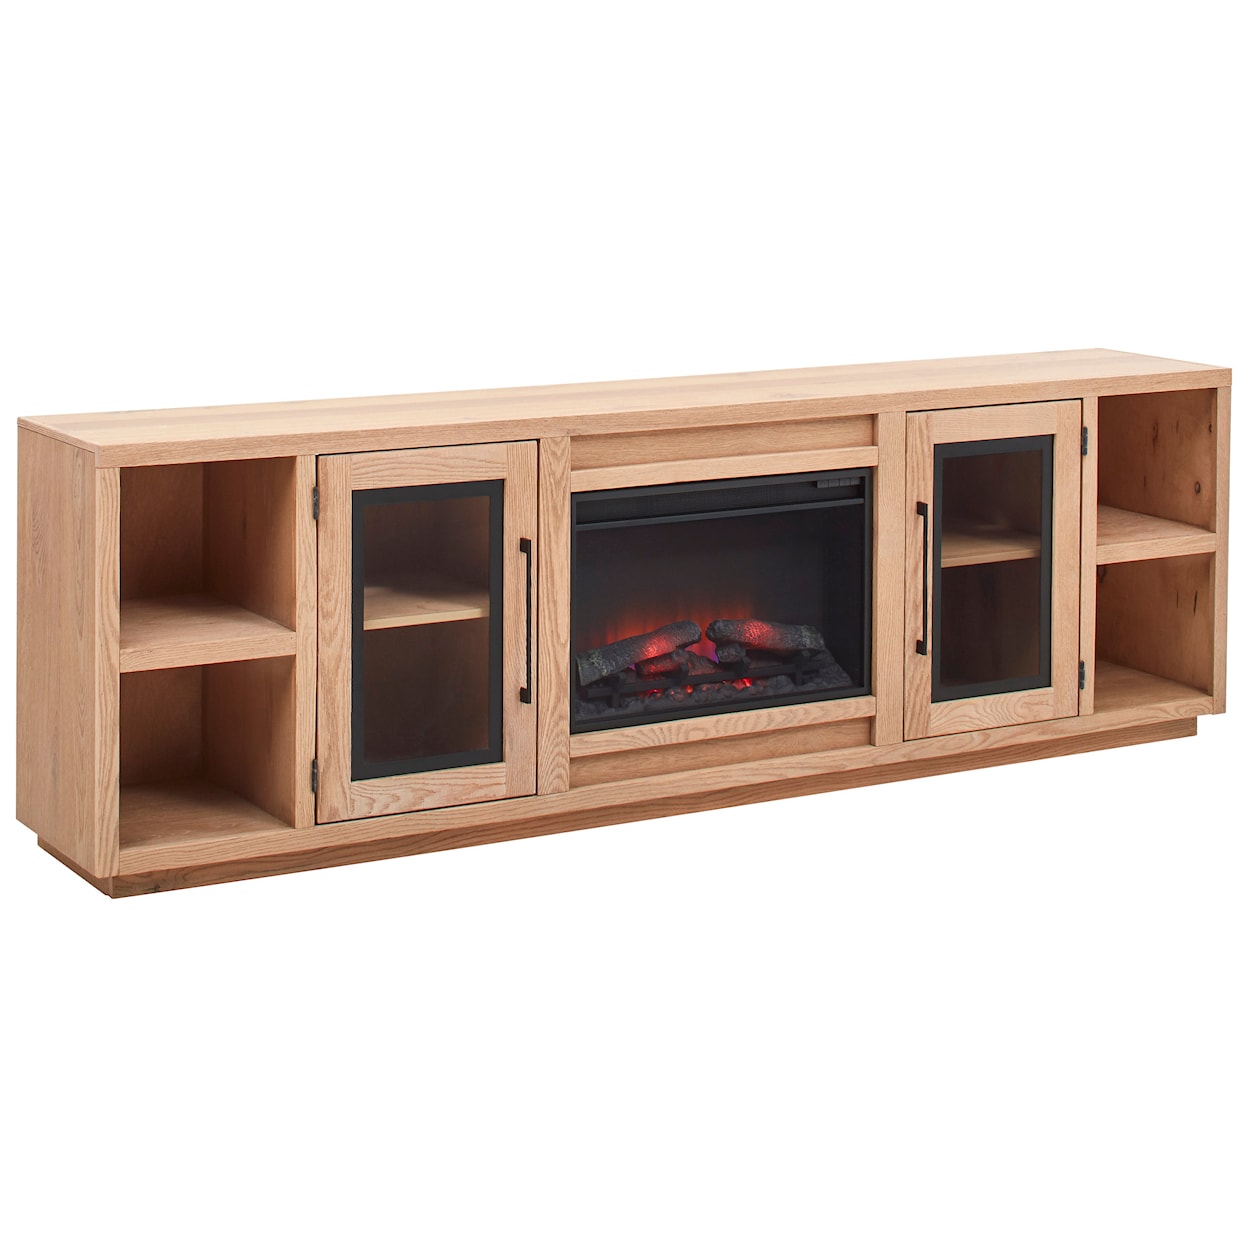 Aspenhome Paige Fireplace Console Table